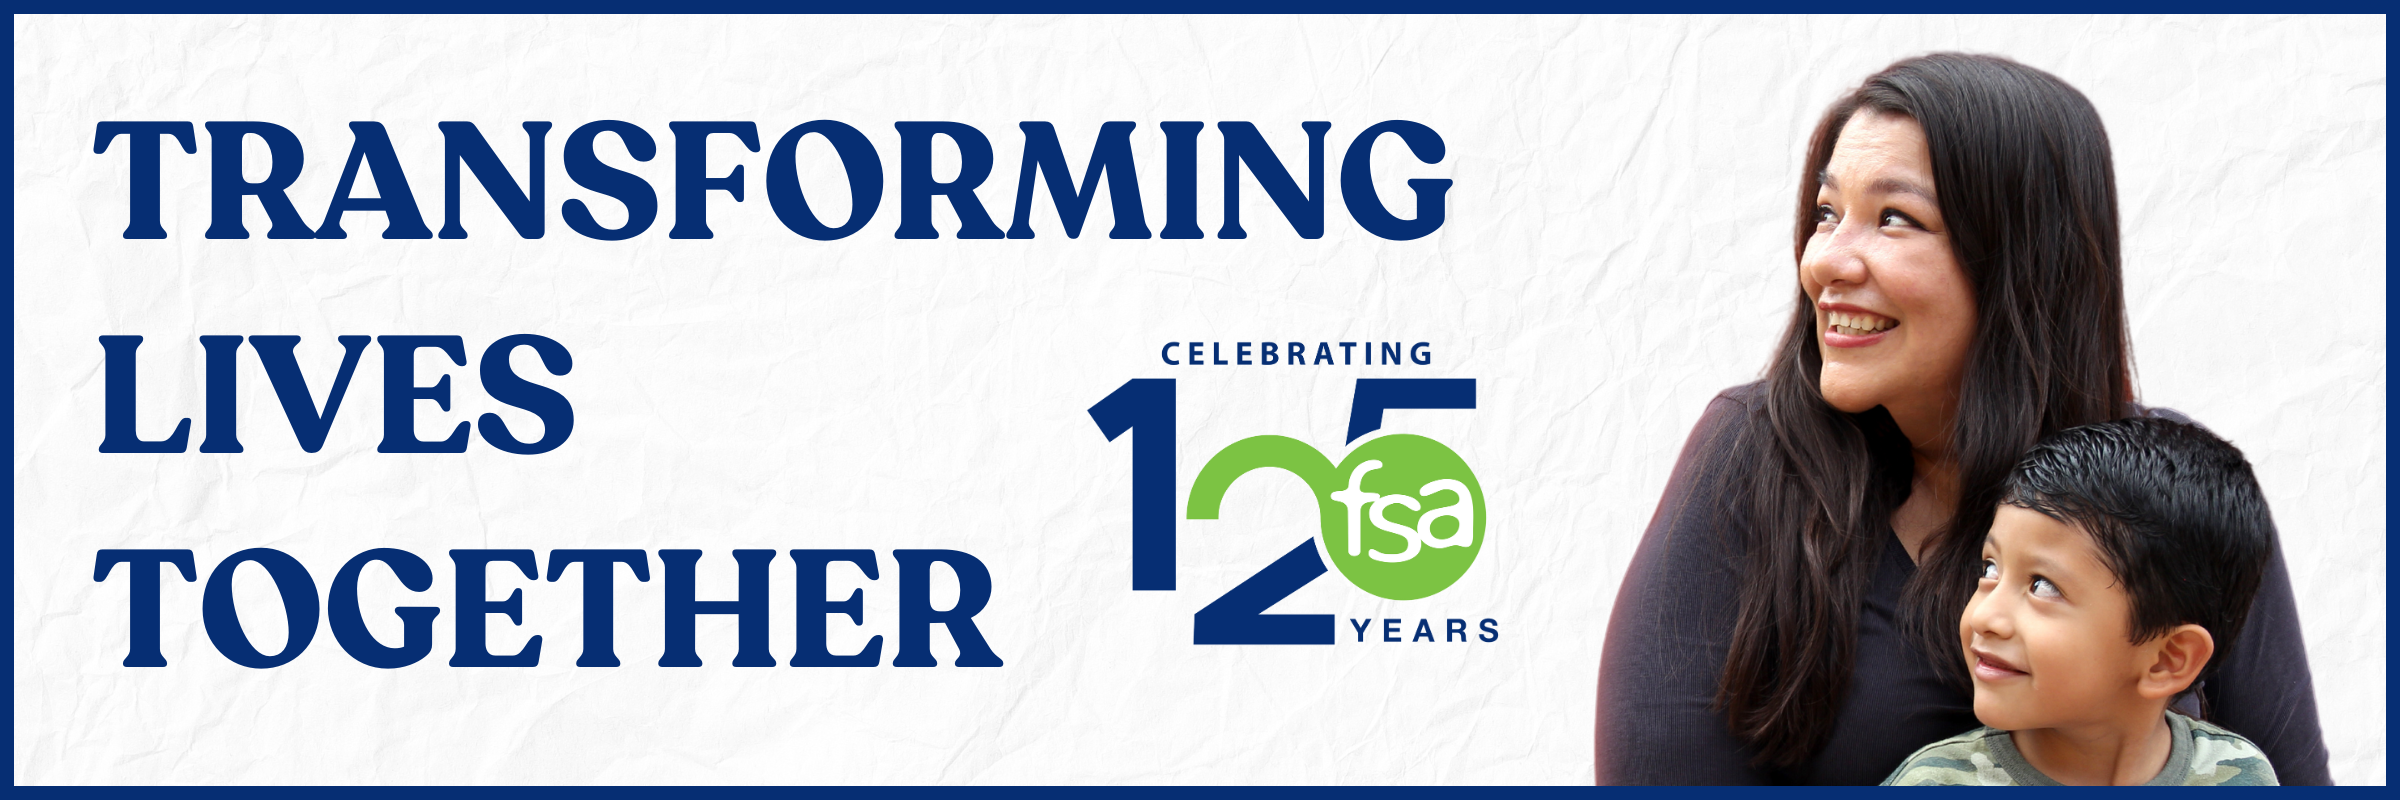 Transforming Lives Together Celebrating 125 Years